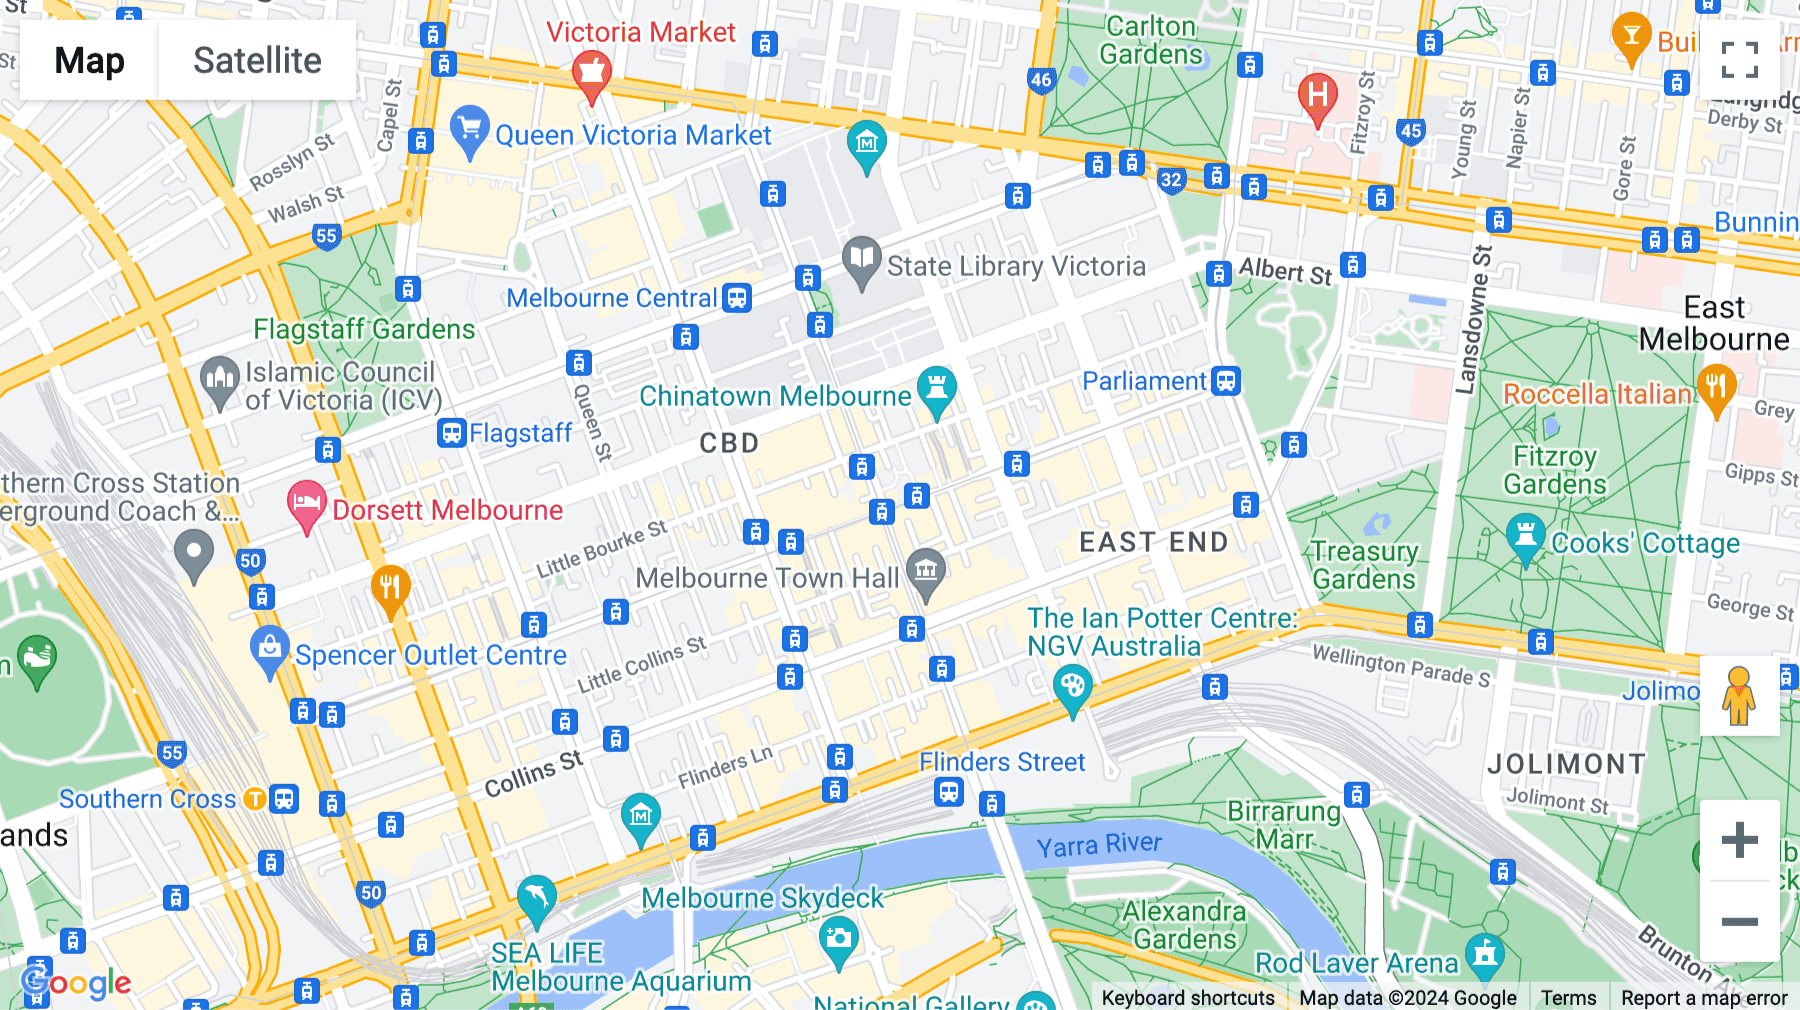 Click for interative map of 80 Collins Street, Melbourne, Melbourne